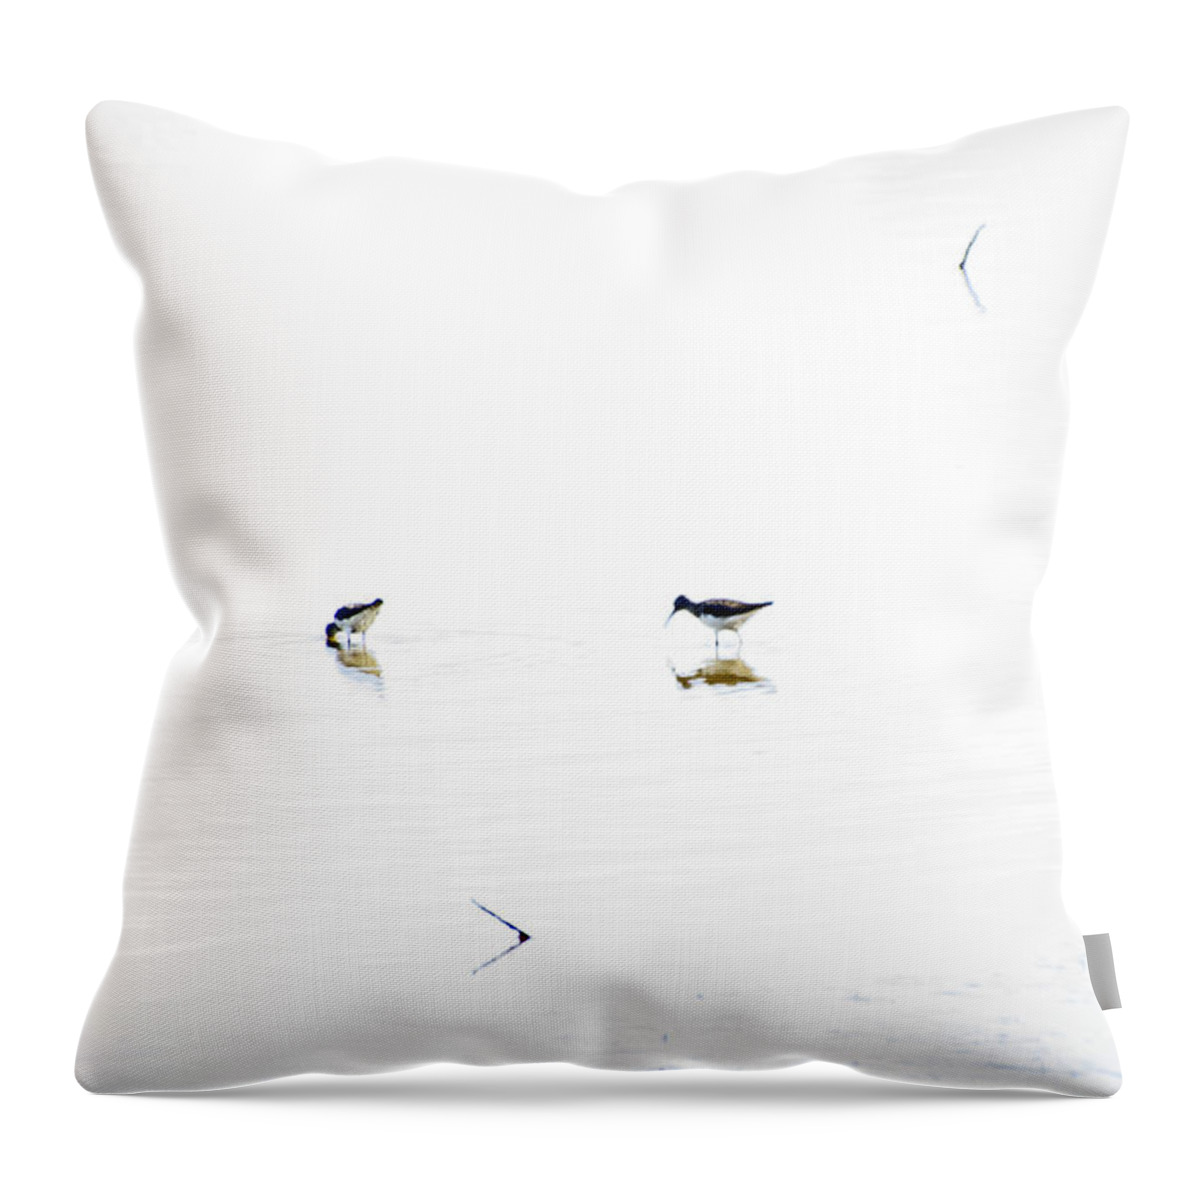 Sandpipers Throw Pillow featuring the photograph Sandpipers - Minimalism by Carol Senske